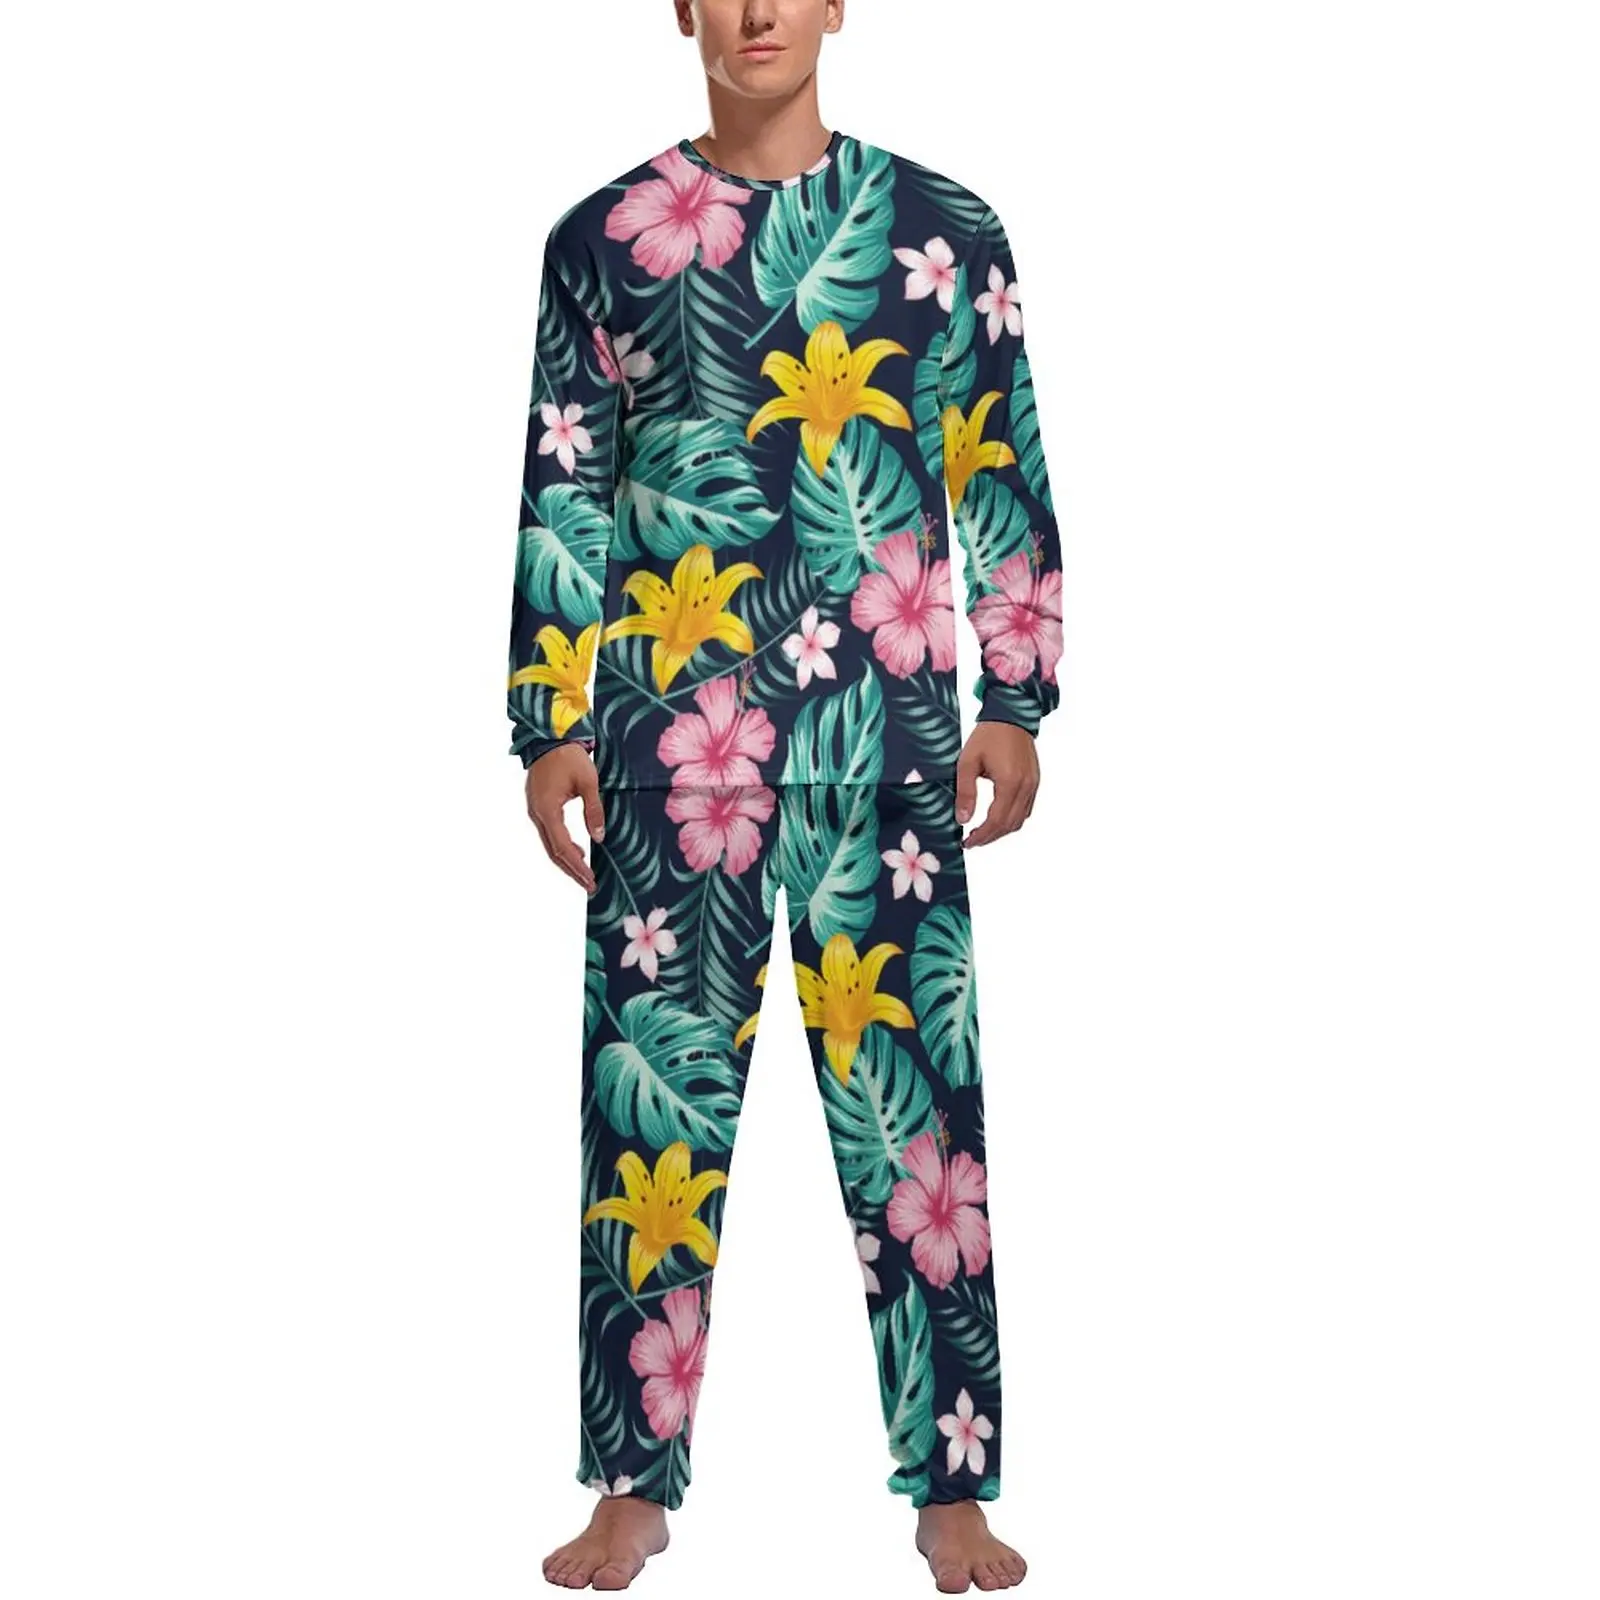 Pink Hibiscus Flower Pajamas Men Palm Leaves Print Elegant Home Suit Winter Long-Sleeve 2 Pieces Casual Graphic Pajama Sets